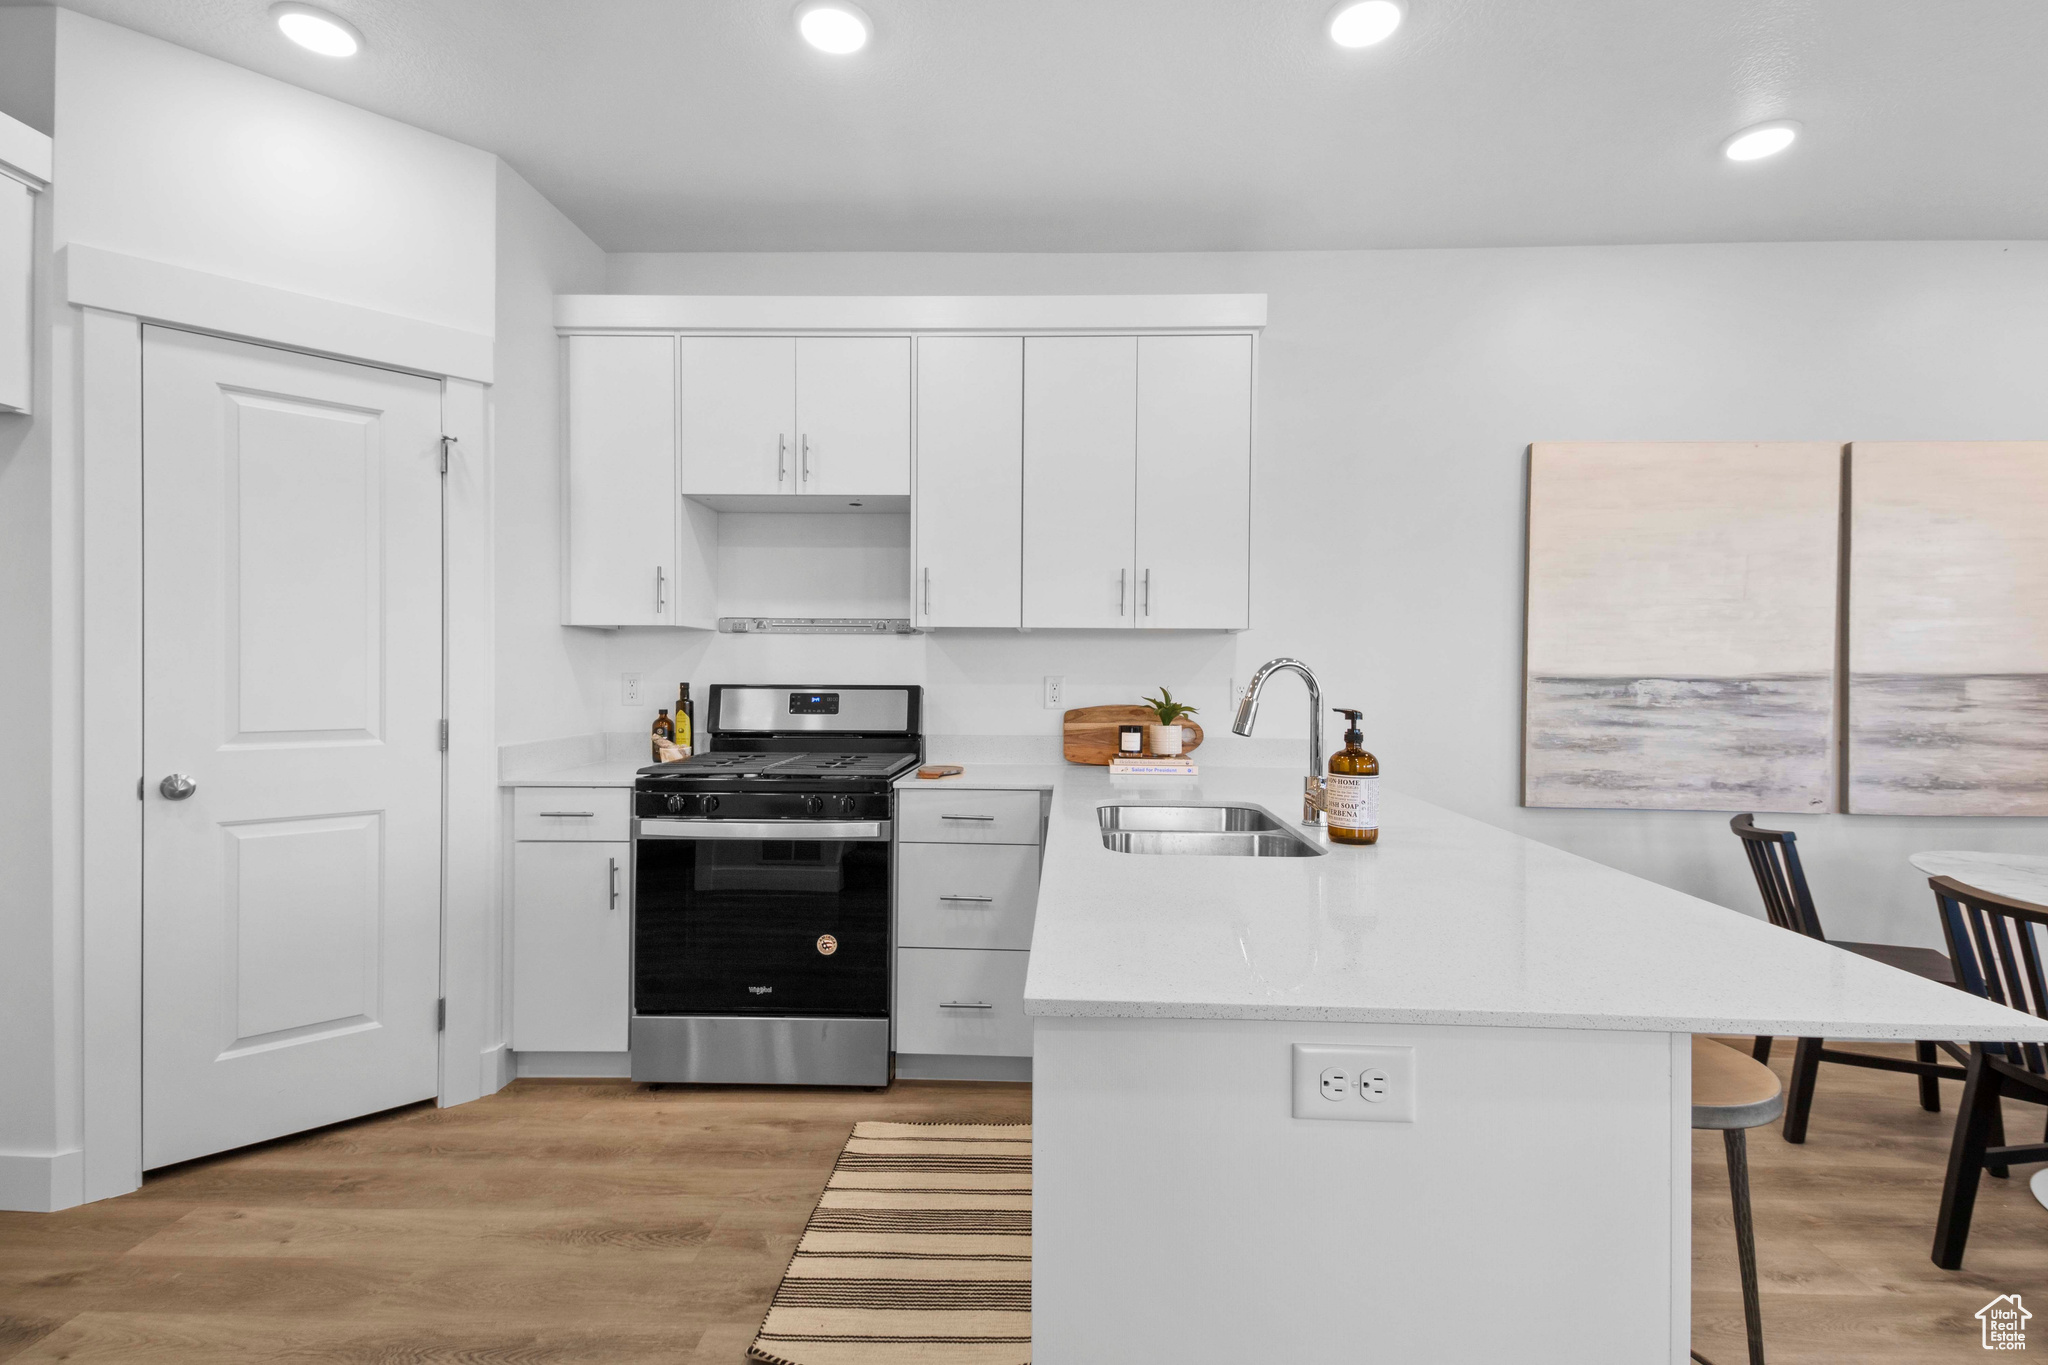 Kitchen with light hardwood / wood-style flooring, a breakfast bar area, white cabinetry, gas stove, and sink